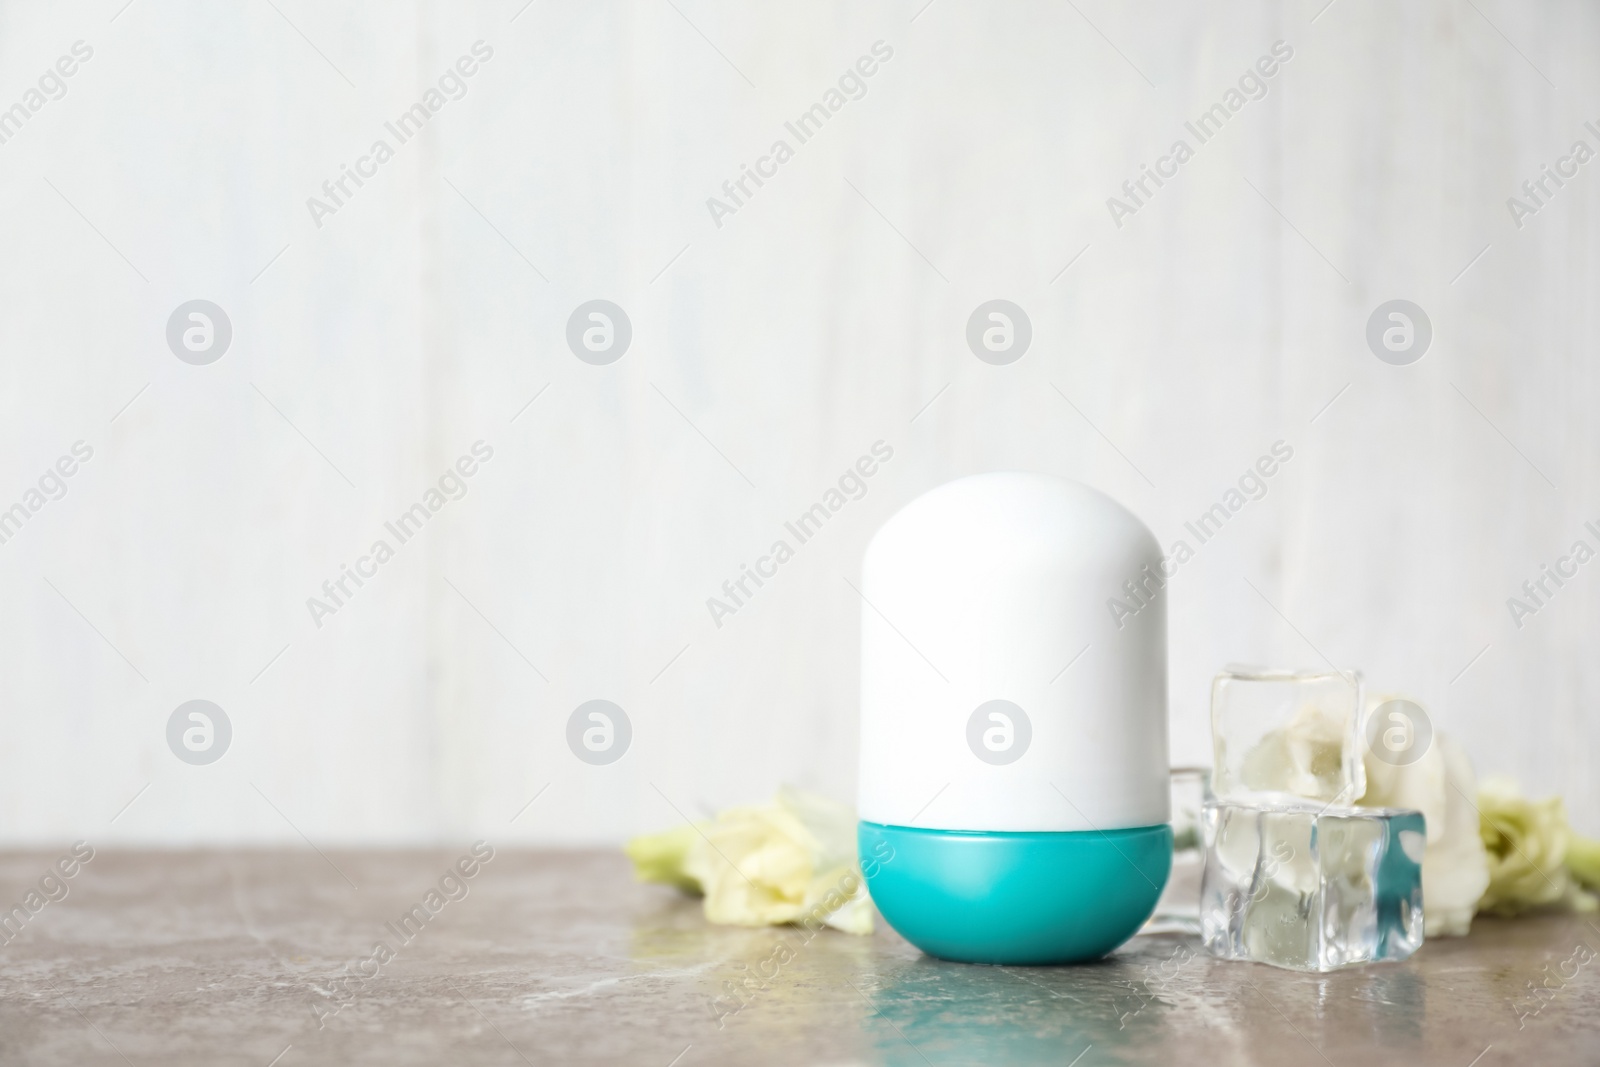 Photo of Deodorant and ice cubes on marble table